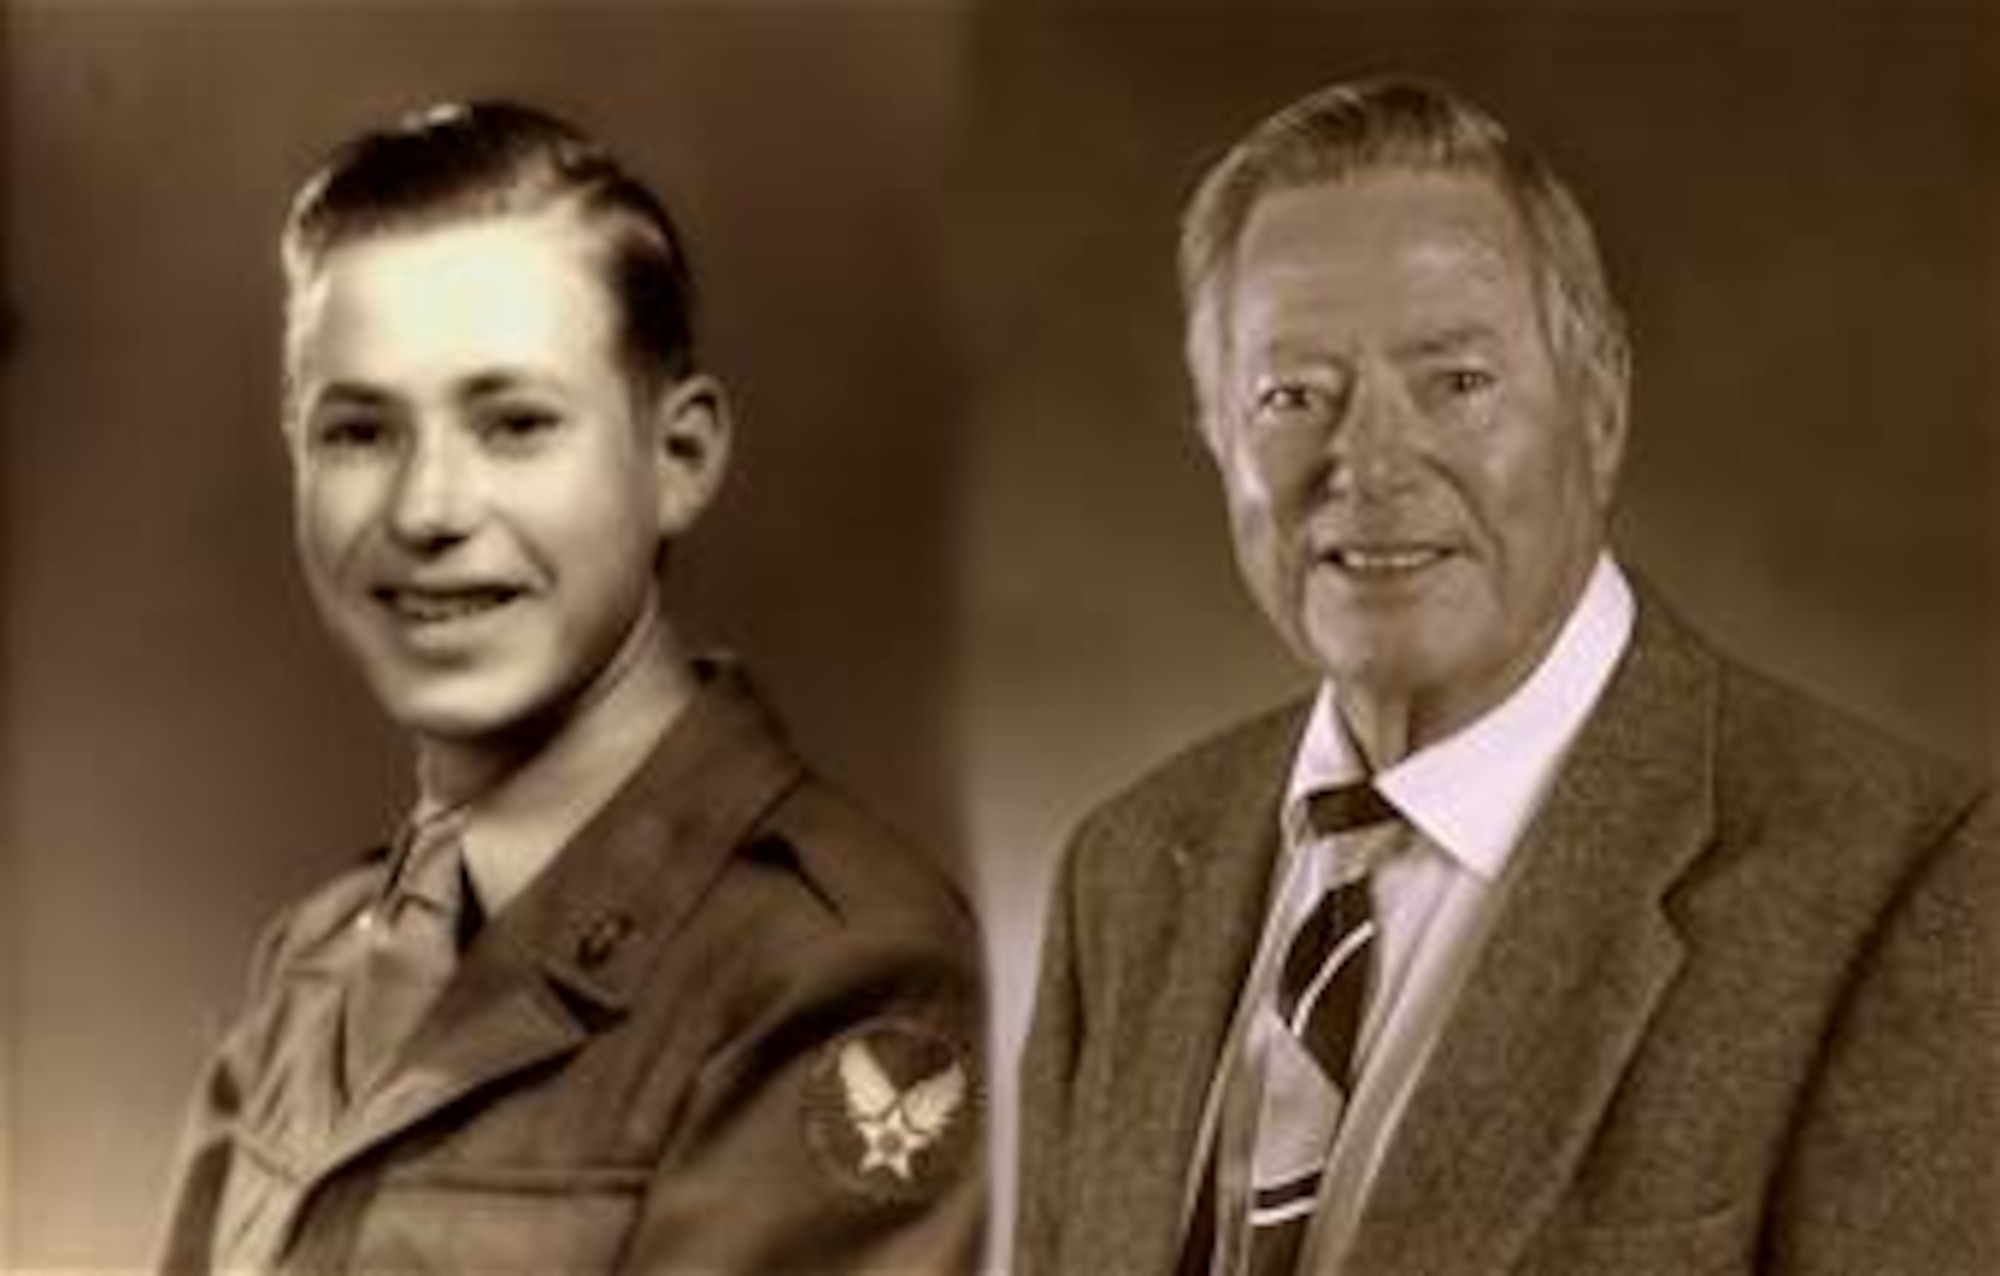 VANDENBERG AIR FORCE BASE, Calif. -- Retired Chief Master Sgt. Joseph Mathis, pictured in the late 1940's and present day. (U.S. Air Force graphic illustration)